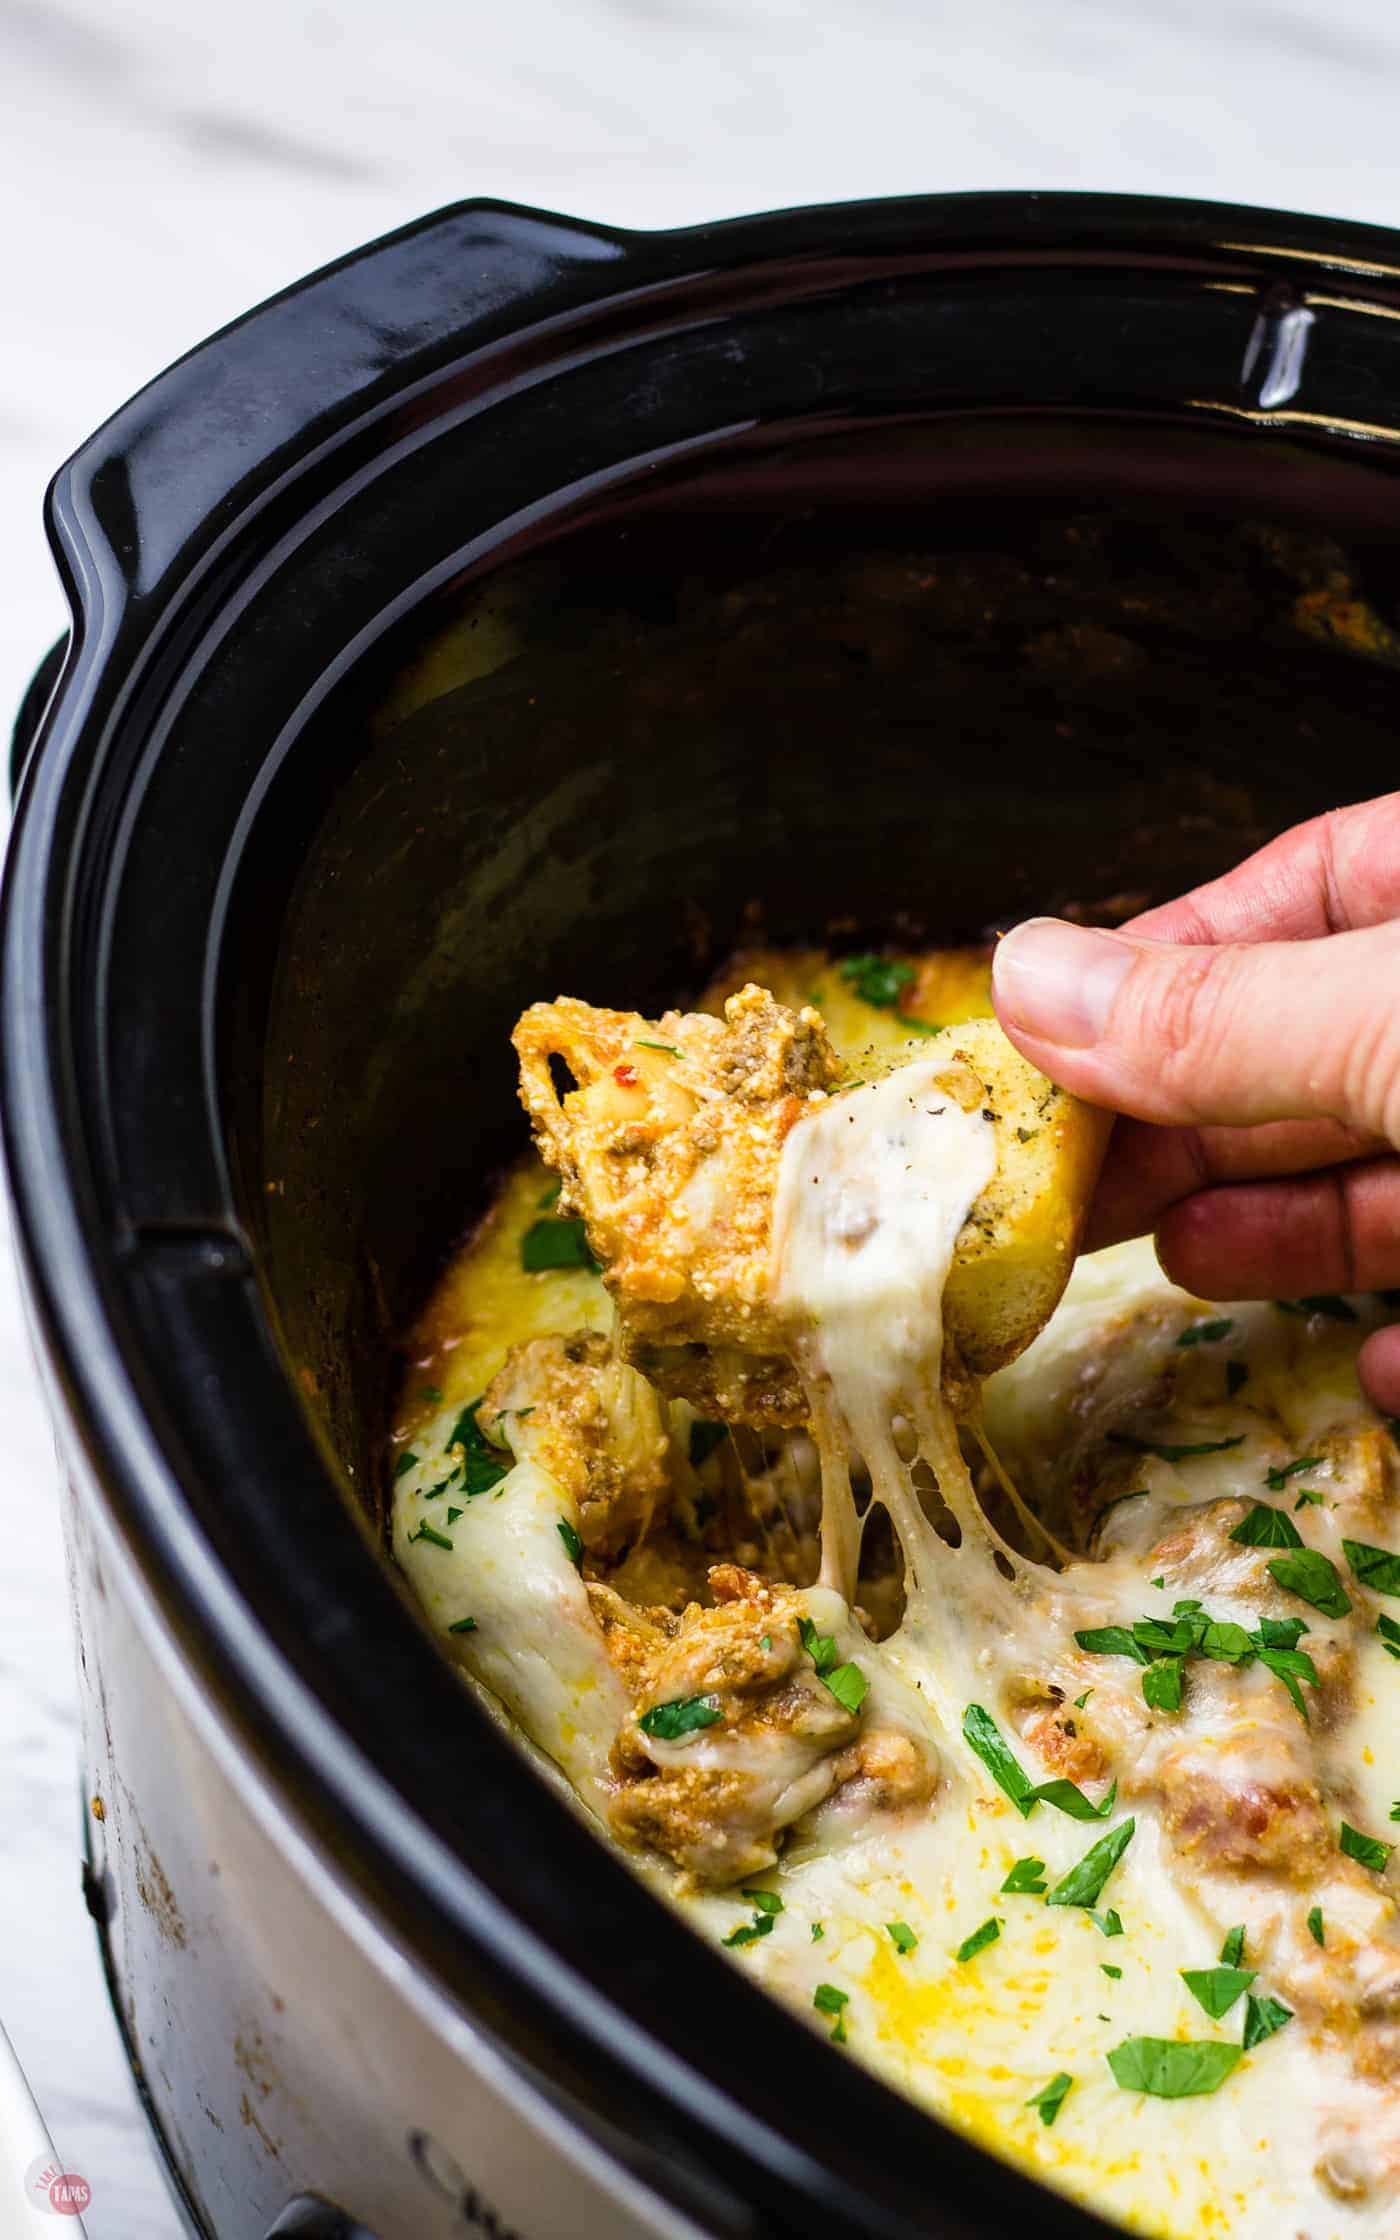 Hand dipping breadstick into the extra cheesy lasagna dip, in a crockpot!